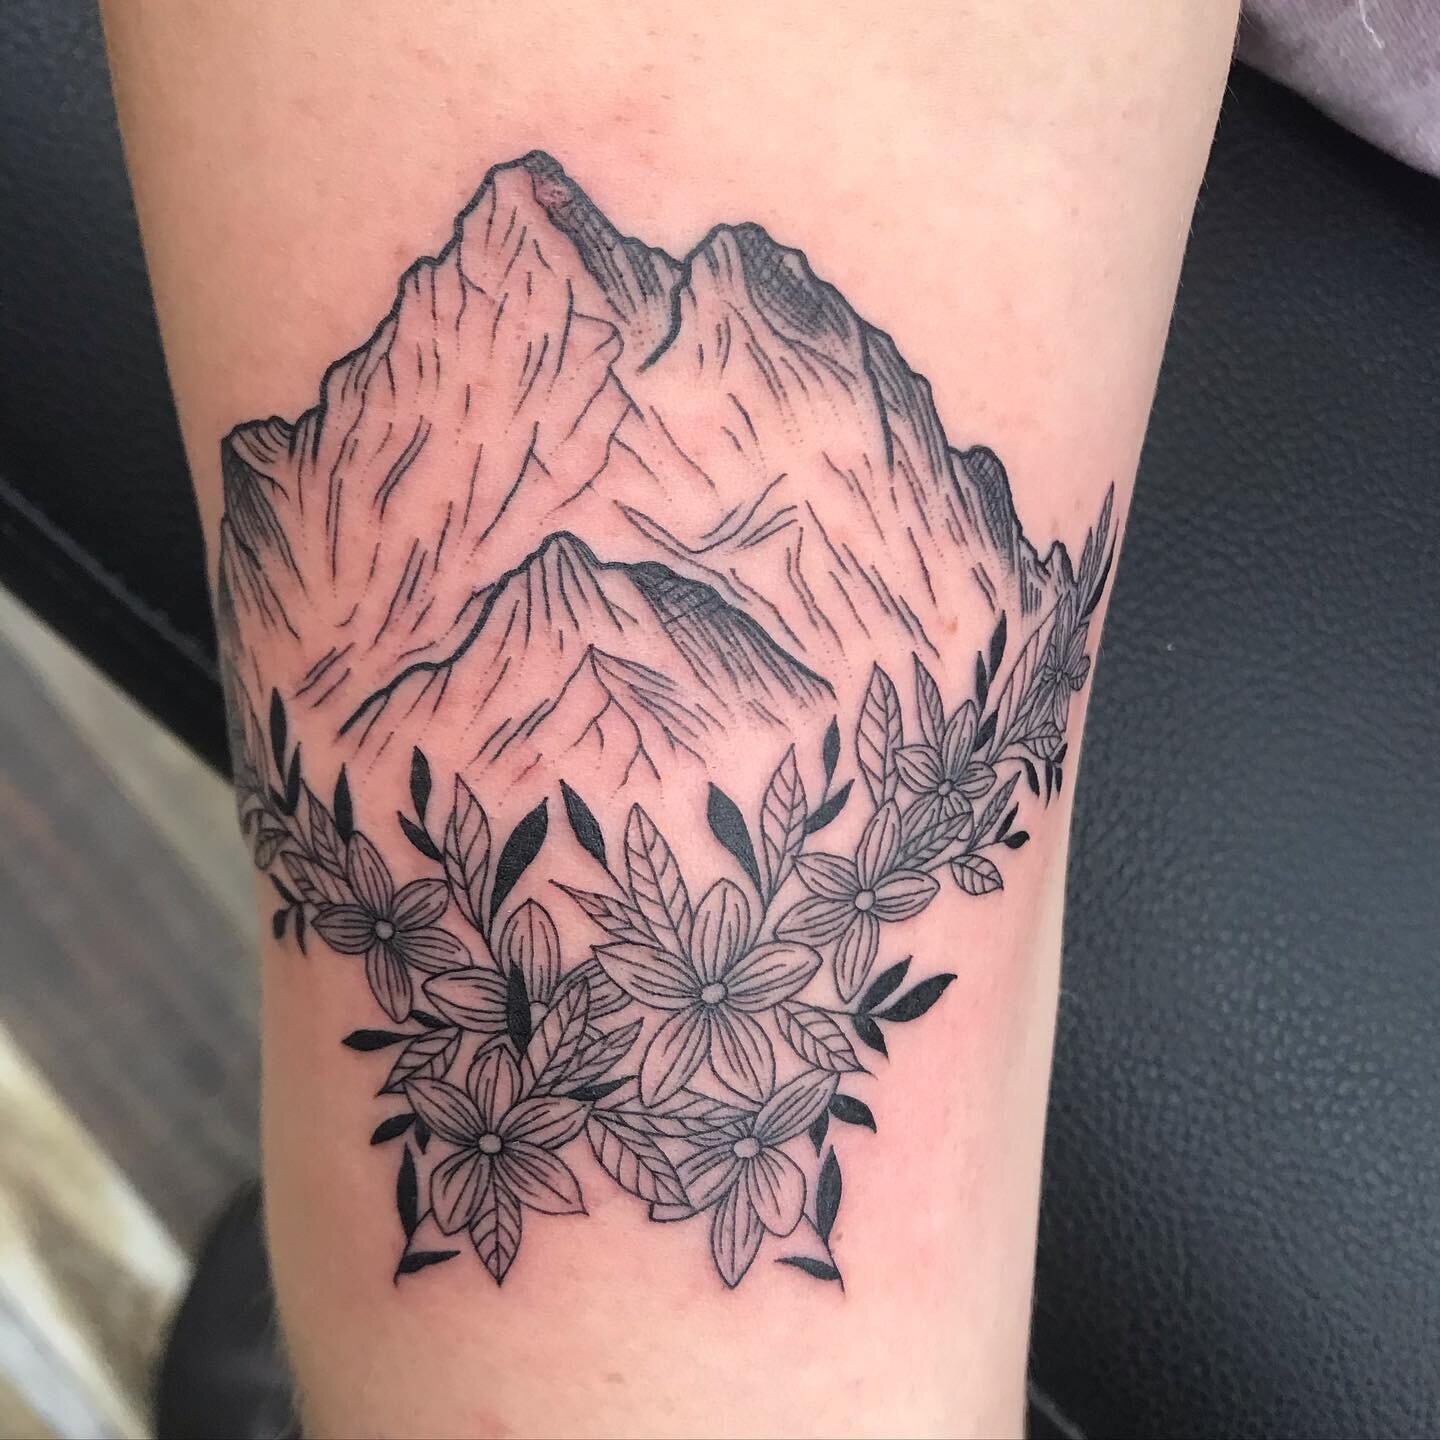 Some minimalist mountains and flowers from a while back. 
.
.
.
#yyj #yyjtattoo #yyjart #vanisle #victoriatattoo #victoriabc #bctattoo #britishcolumbia #mountaintattoo